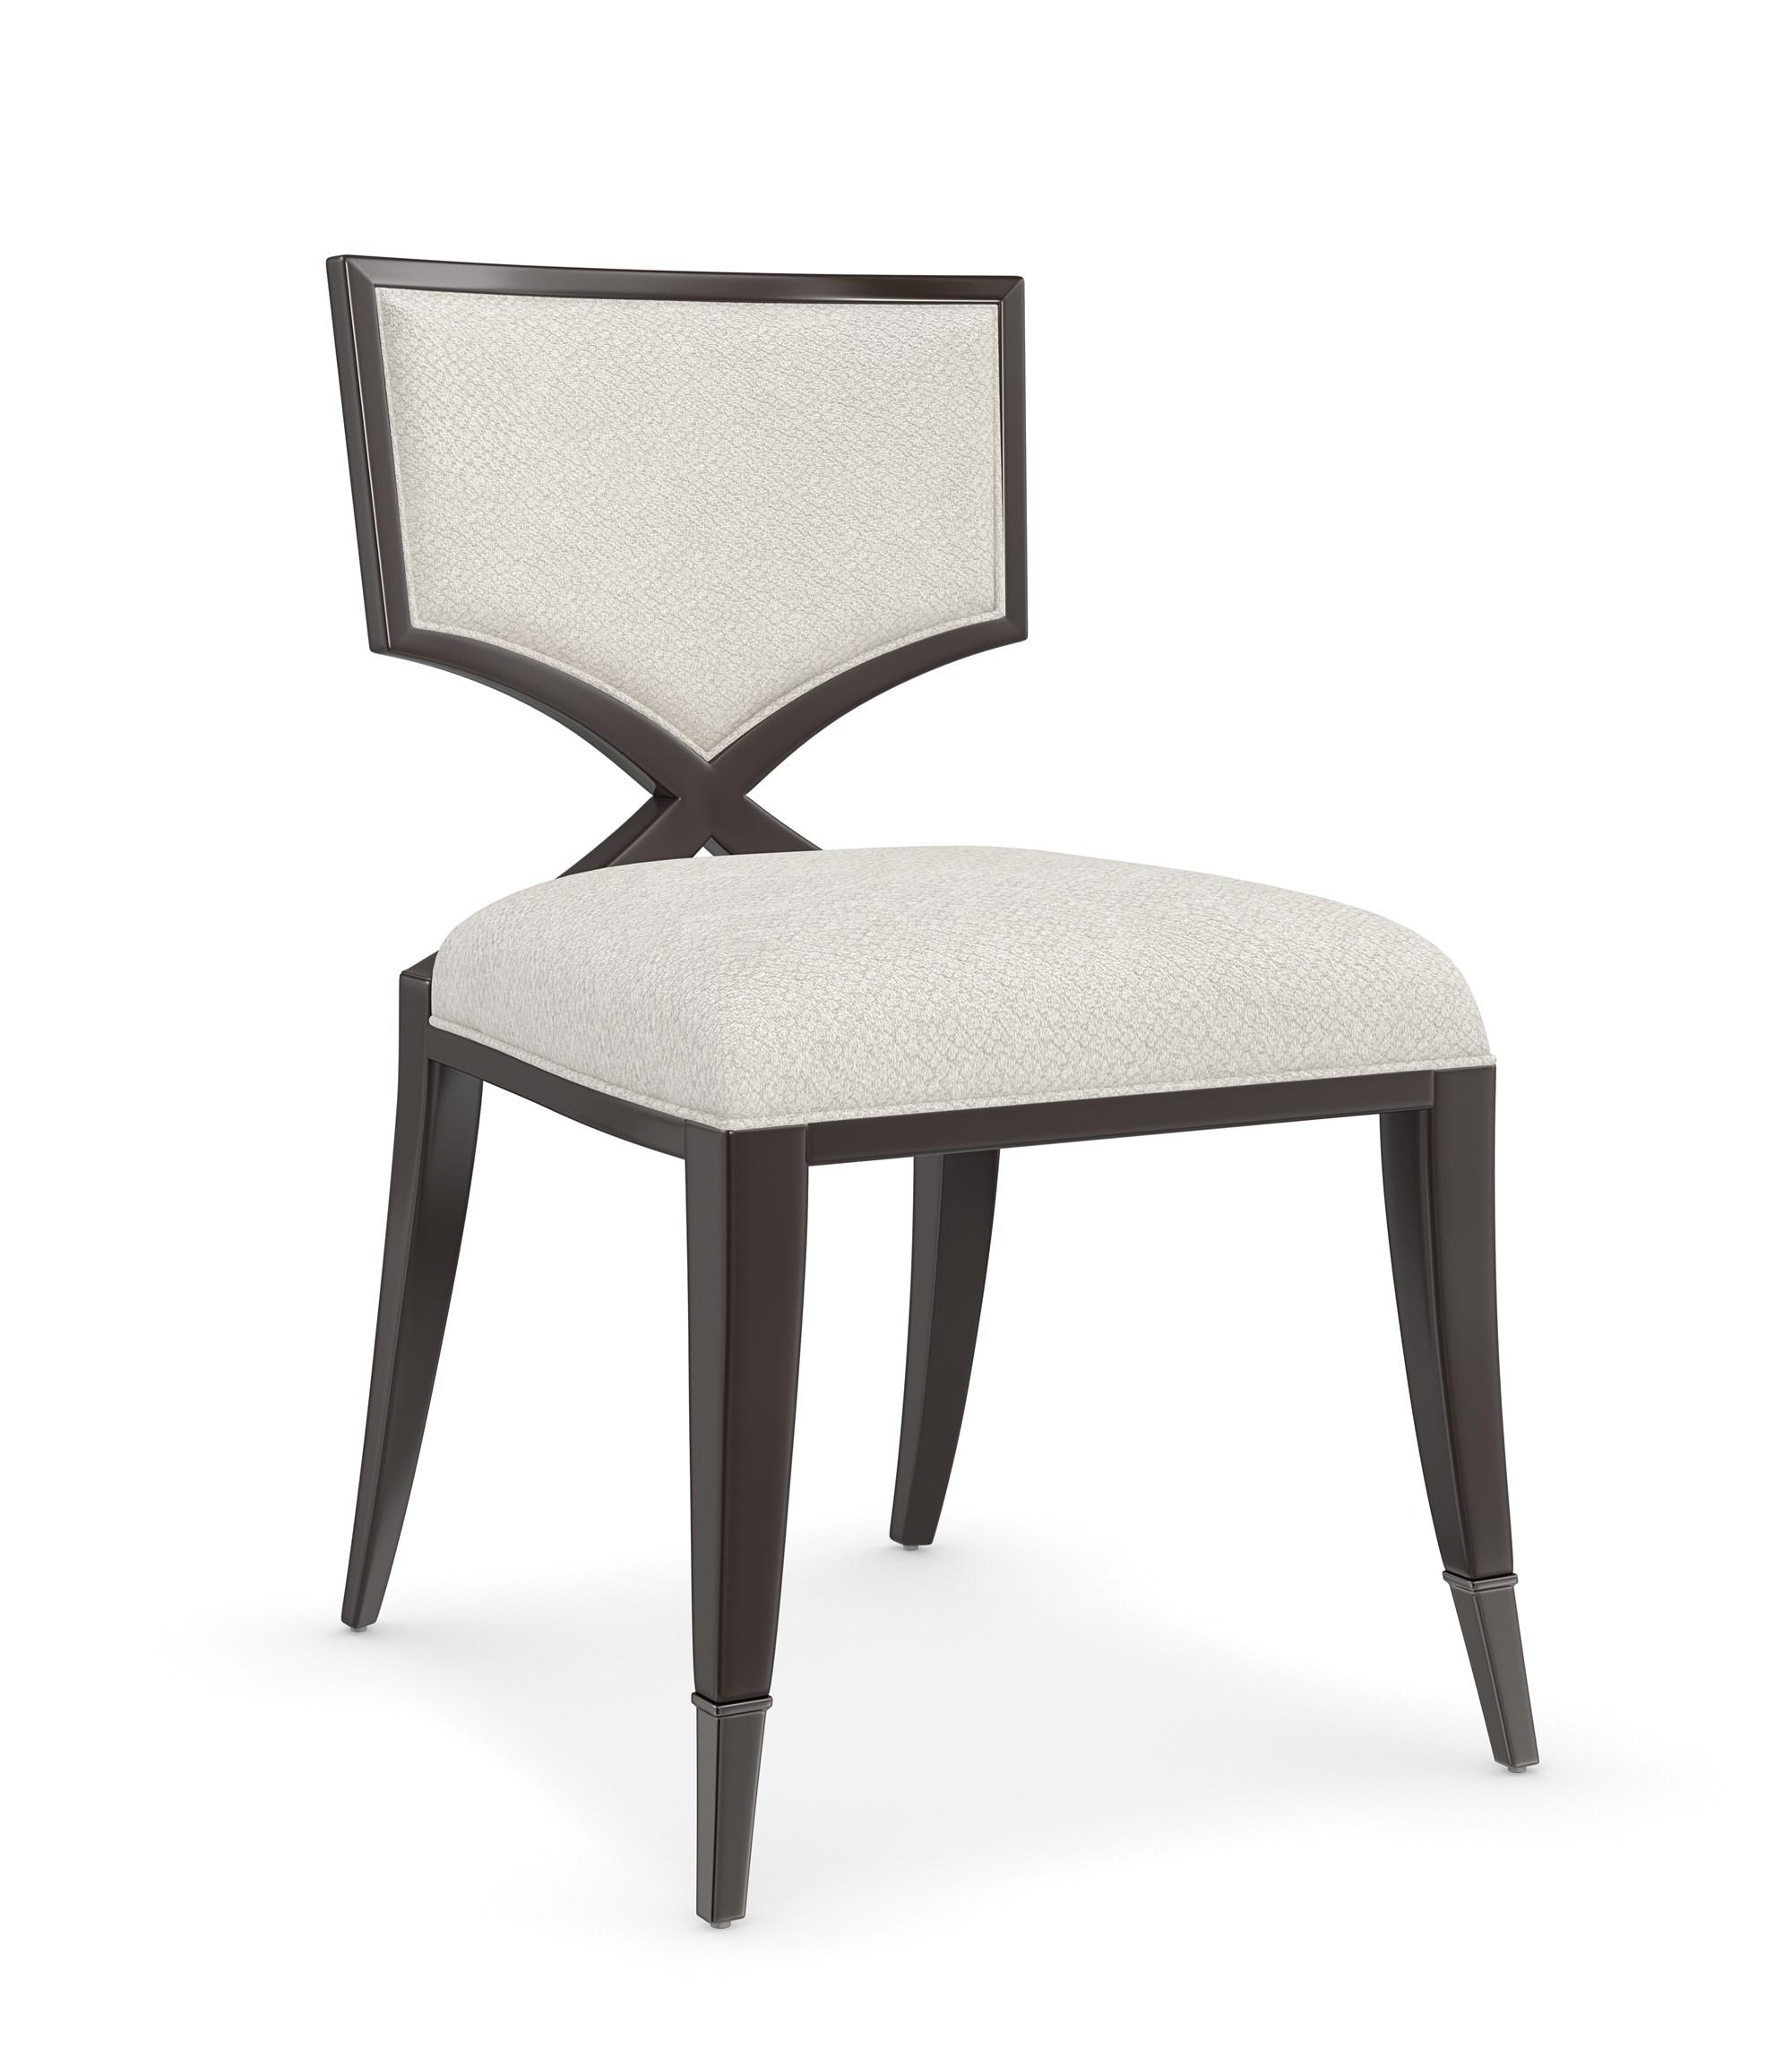 Contemporary Dining Chair Set FIRST CHAIR CLA-422-281-Set-2 in Dark Chocolate, Ivory Fabric